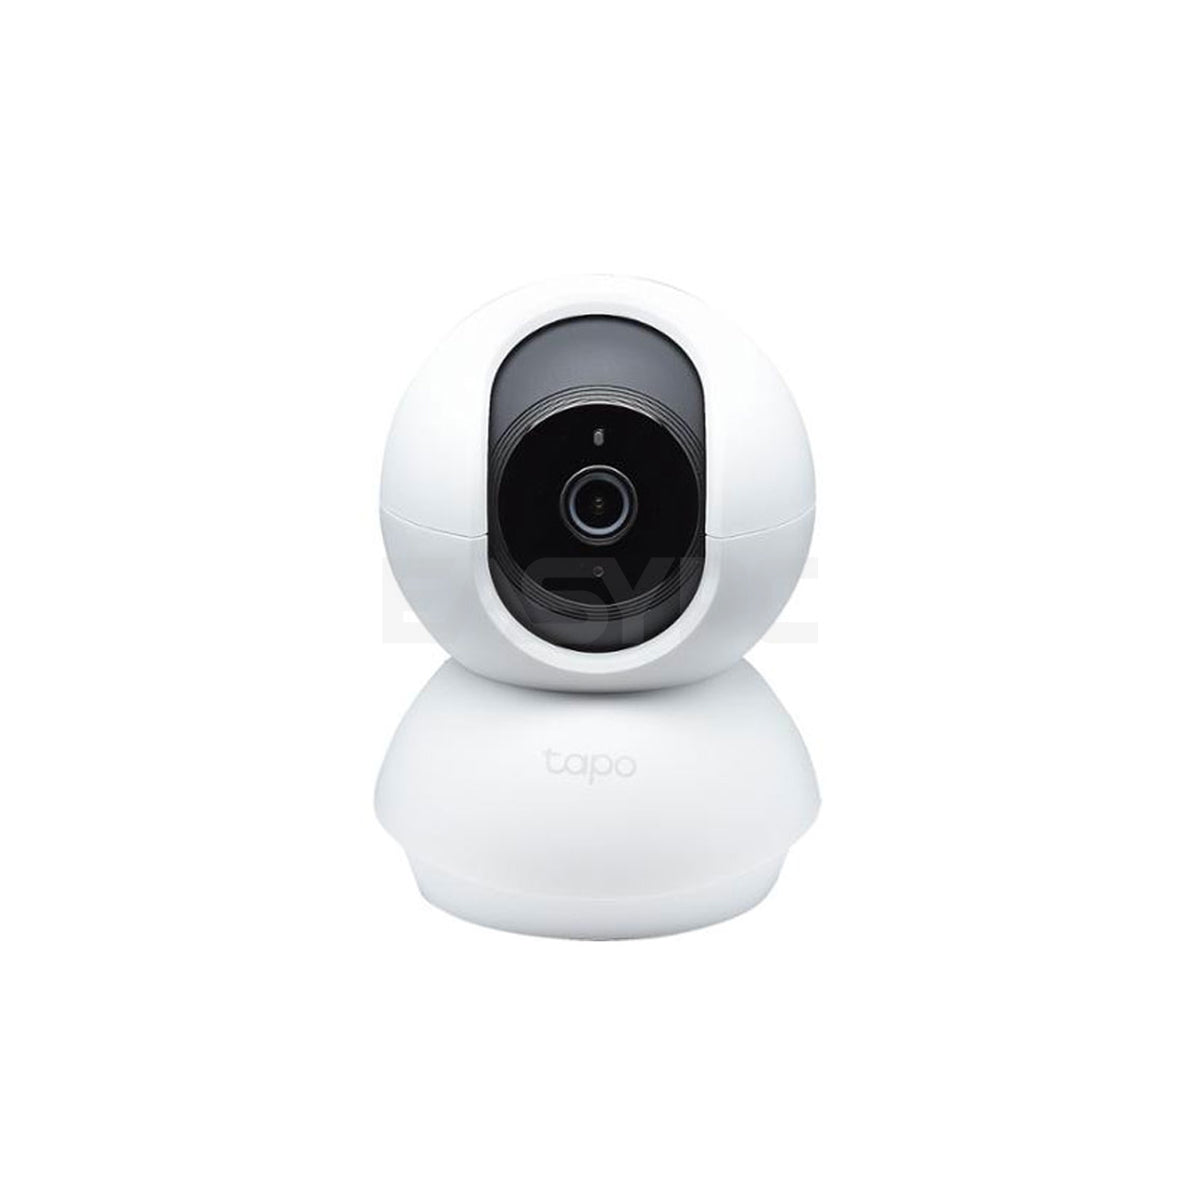 TP-Link Tapo C200 Home Security IP Camera – EasyPC